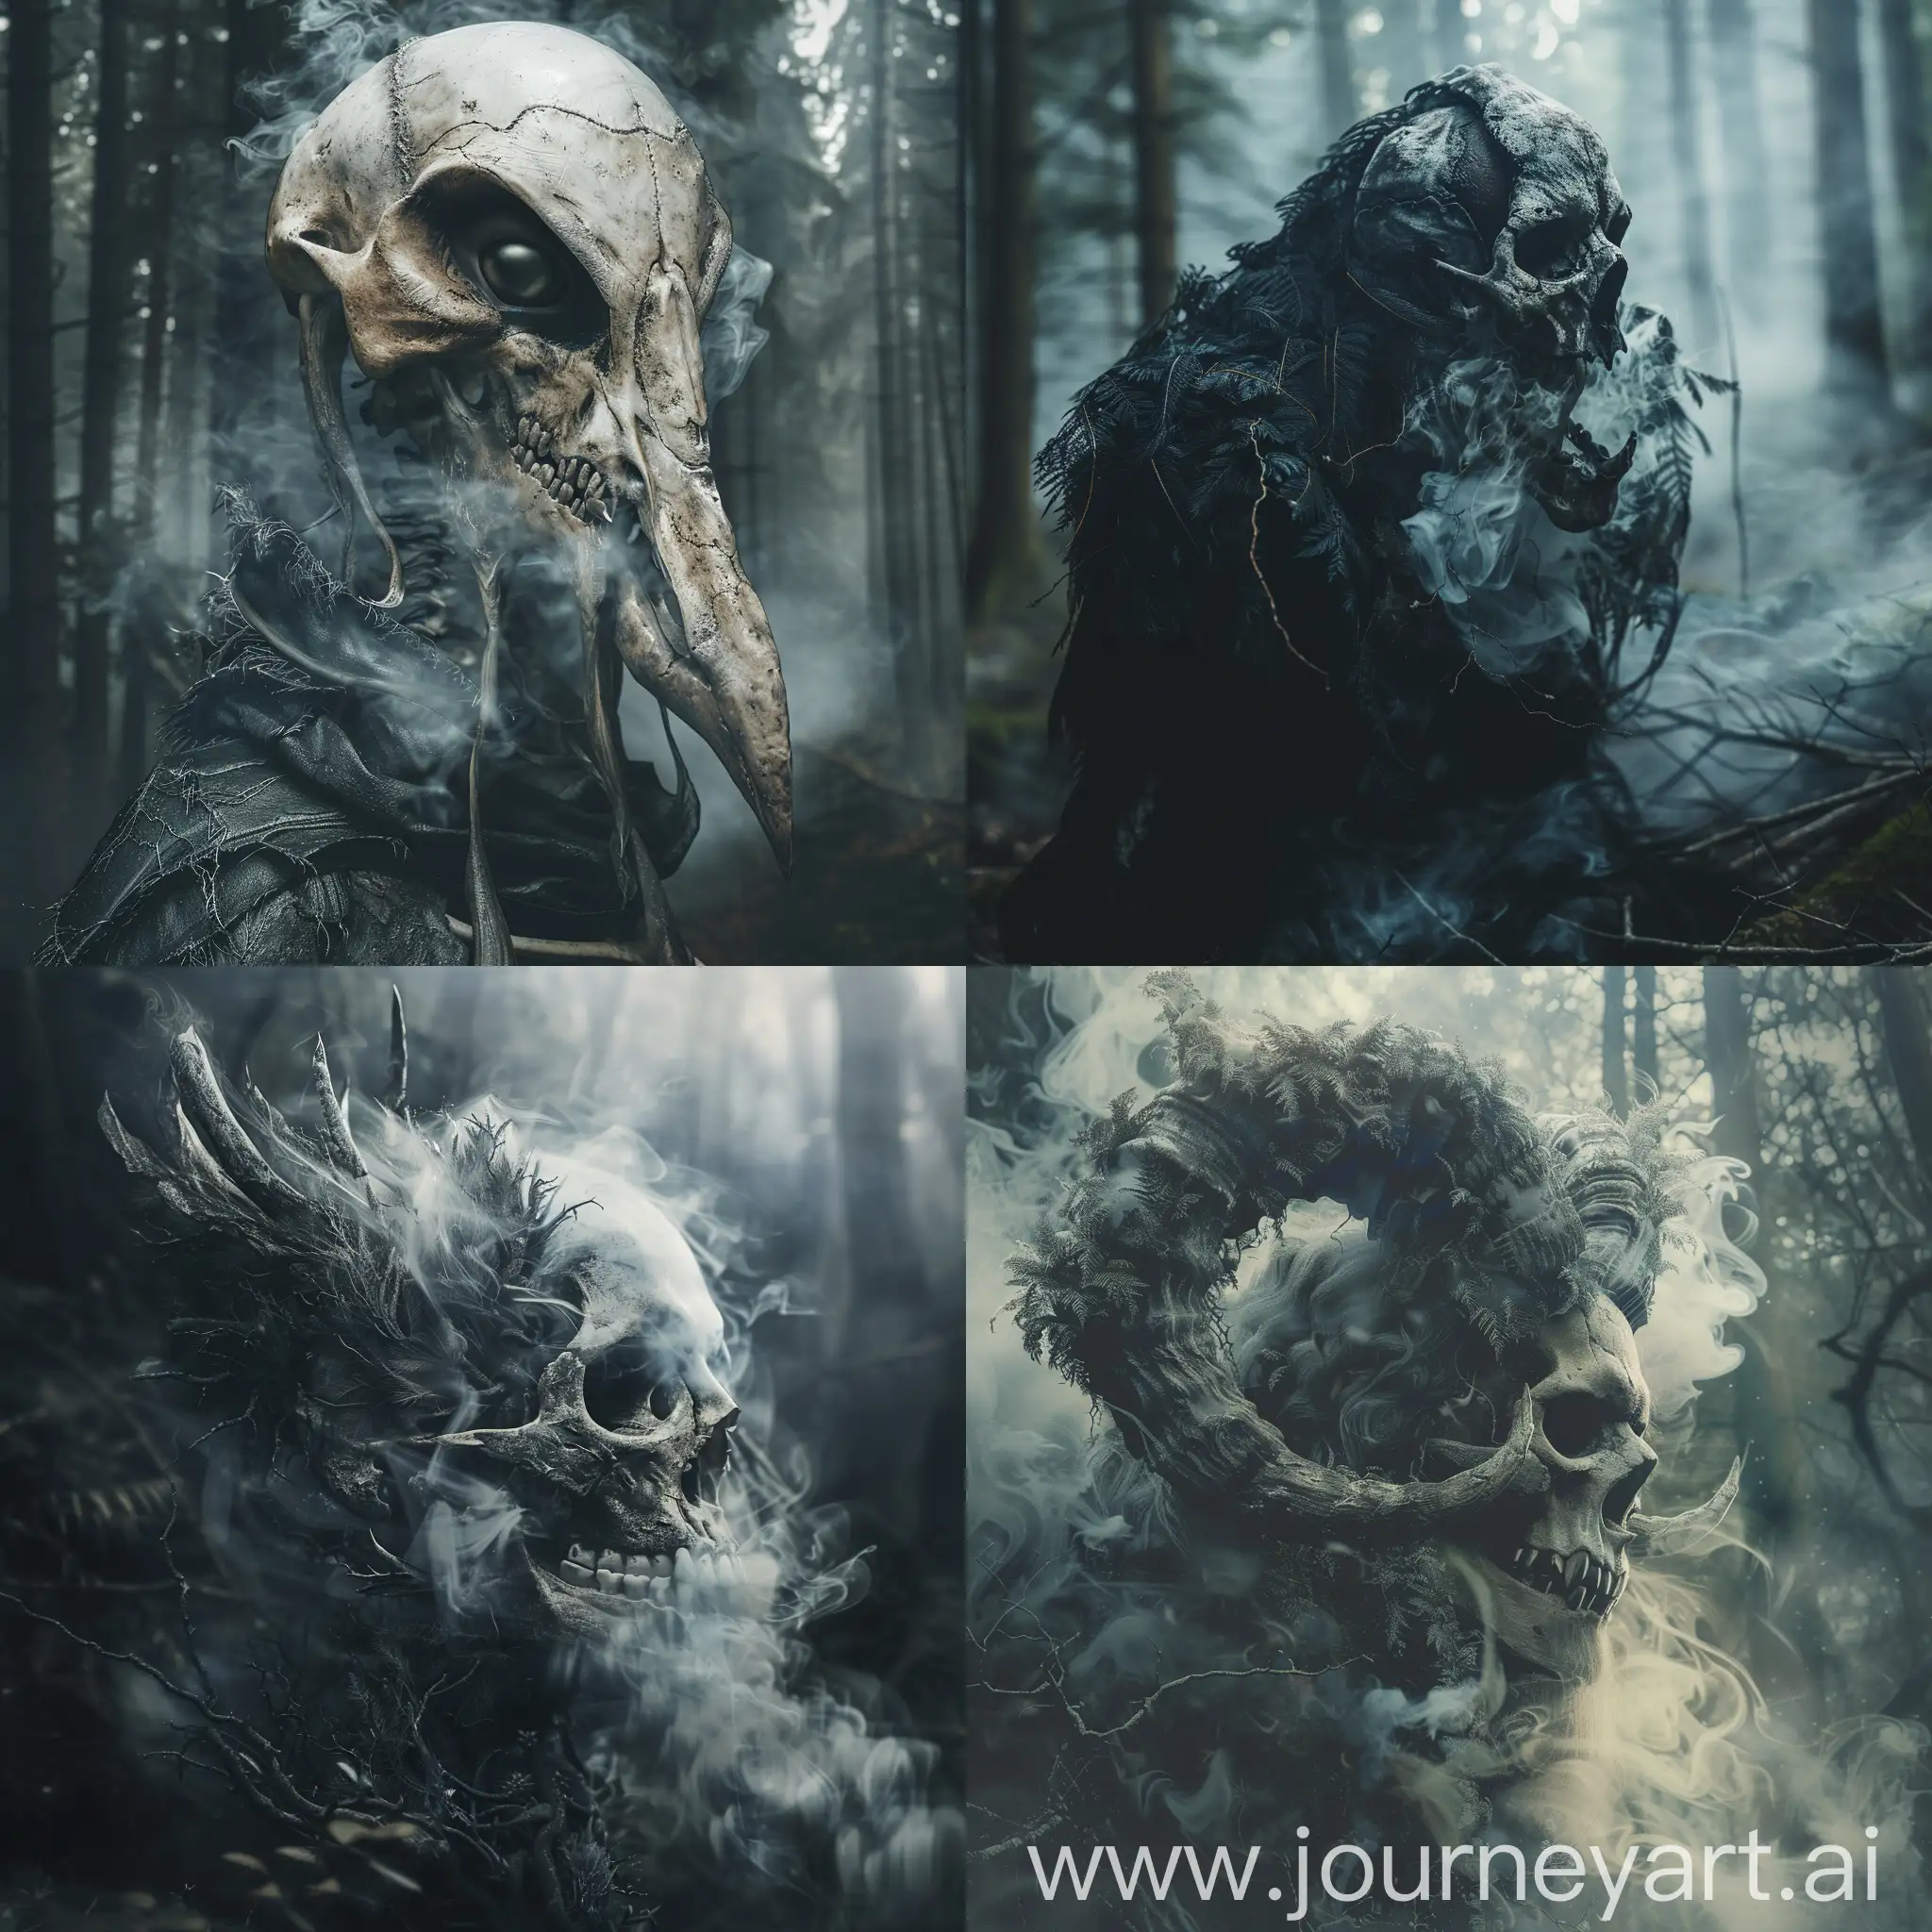 Mythical-Creature-Skull-Portrait-in-Dark-Forest-with-Dramatic-Lighting